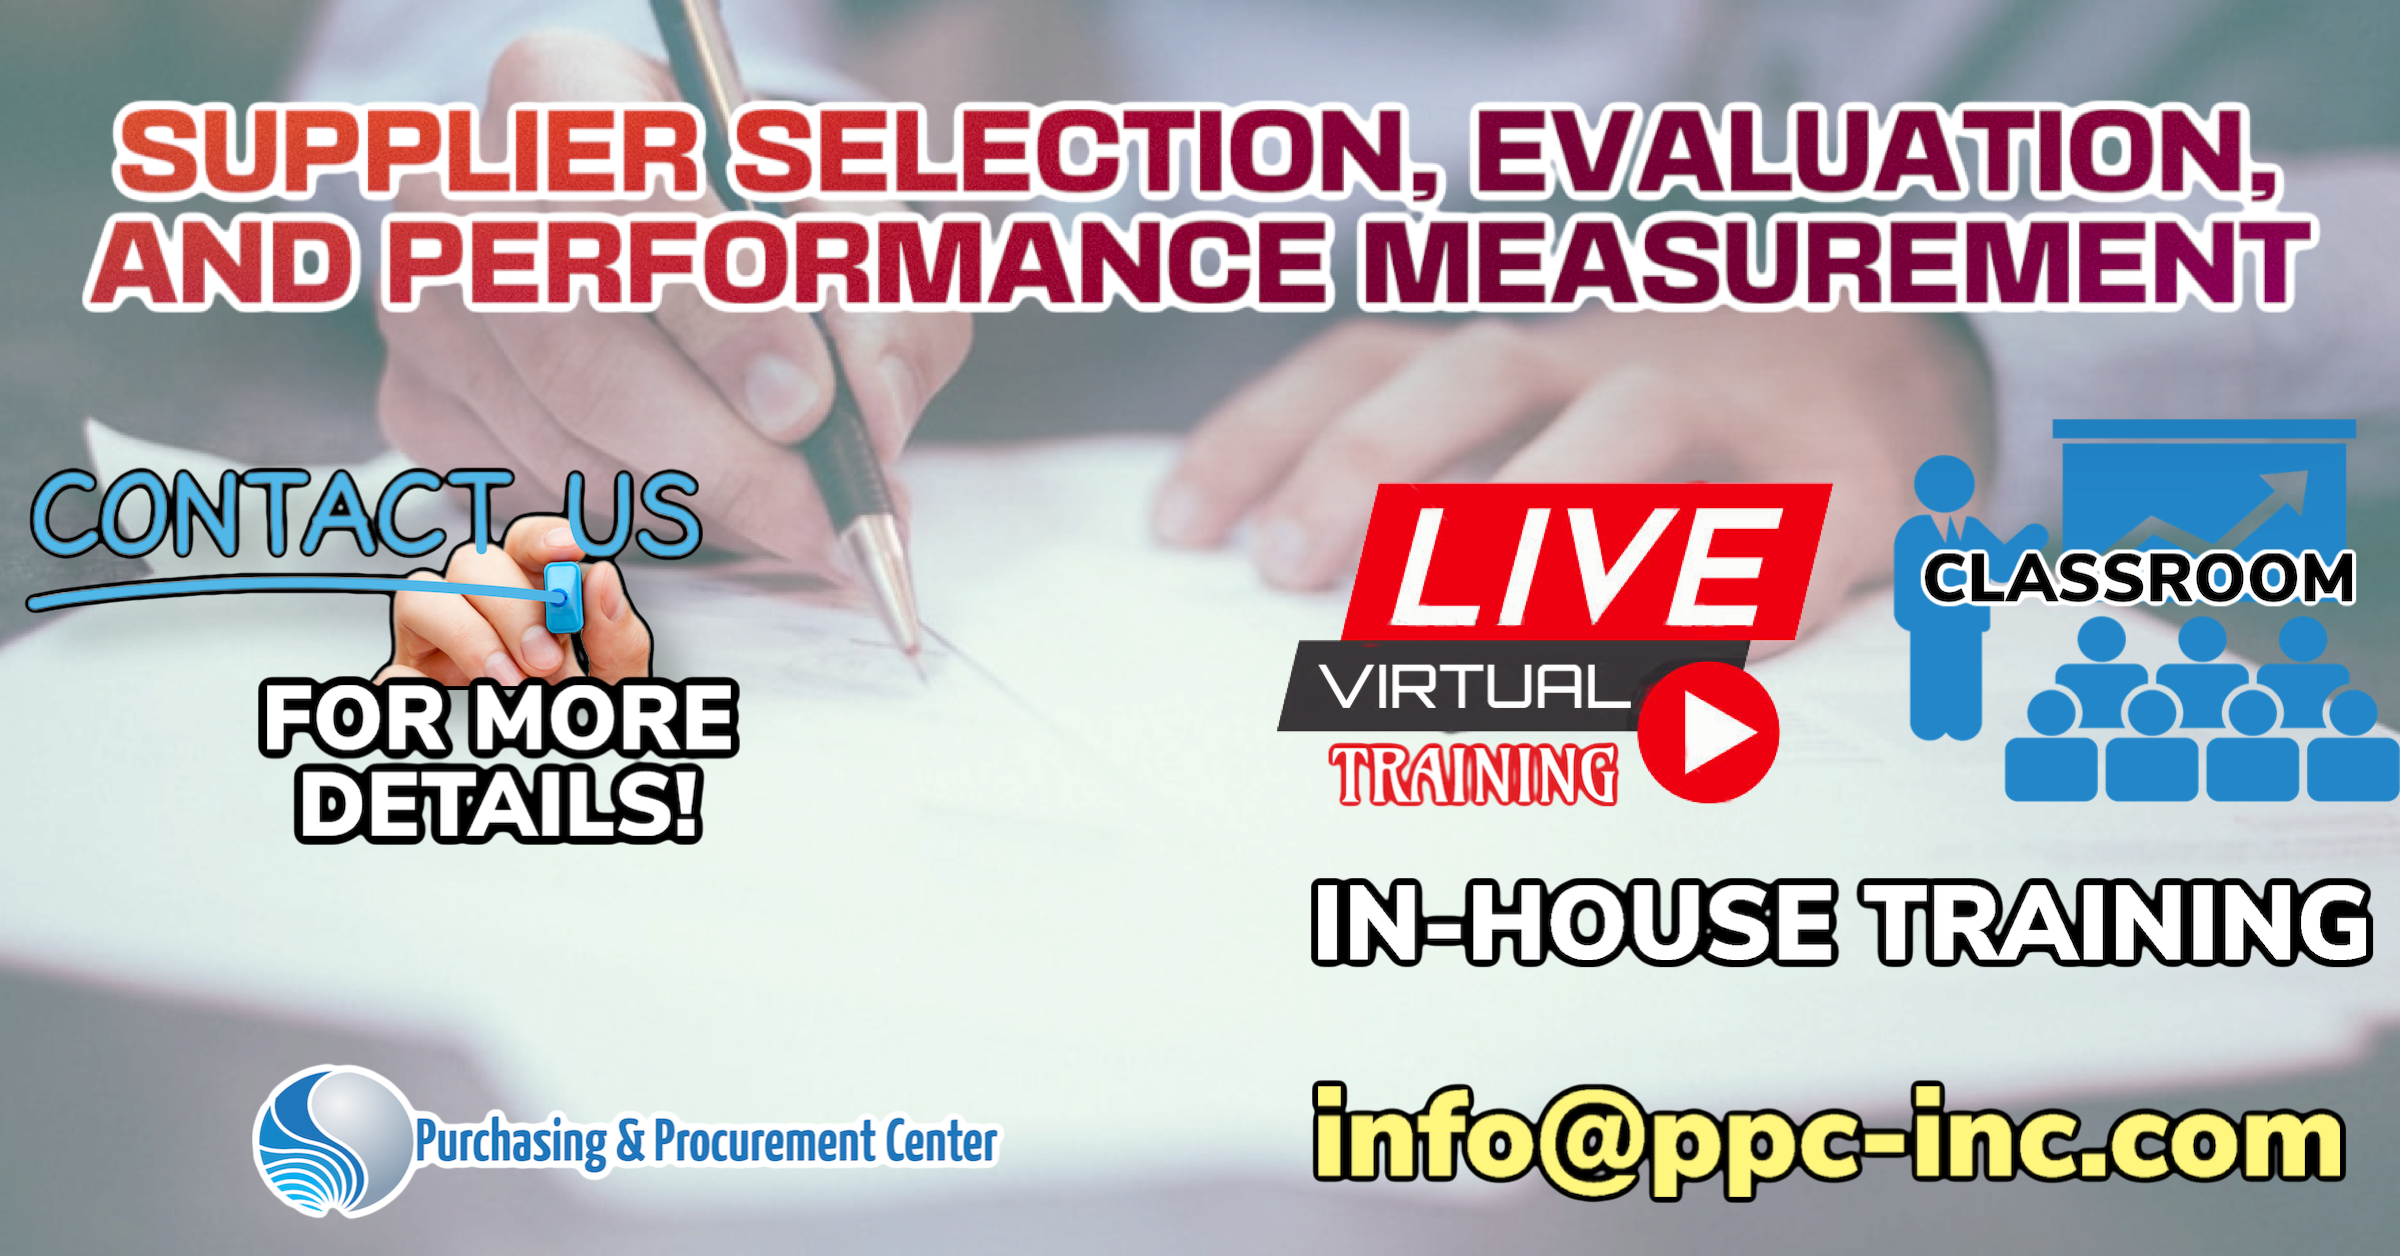 The Supplier Selection, Evaluation, and Performance Measurement course provides strategic and practical insights into achieving higher supplier performance.